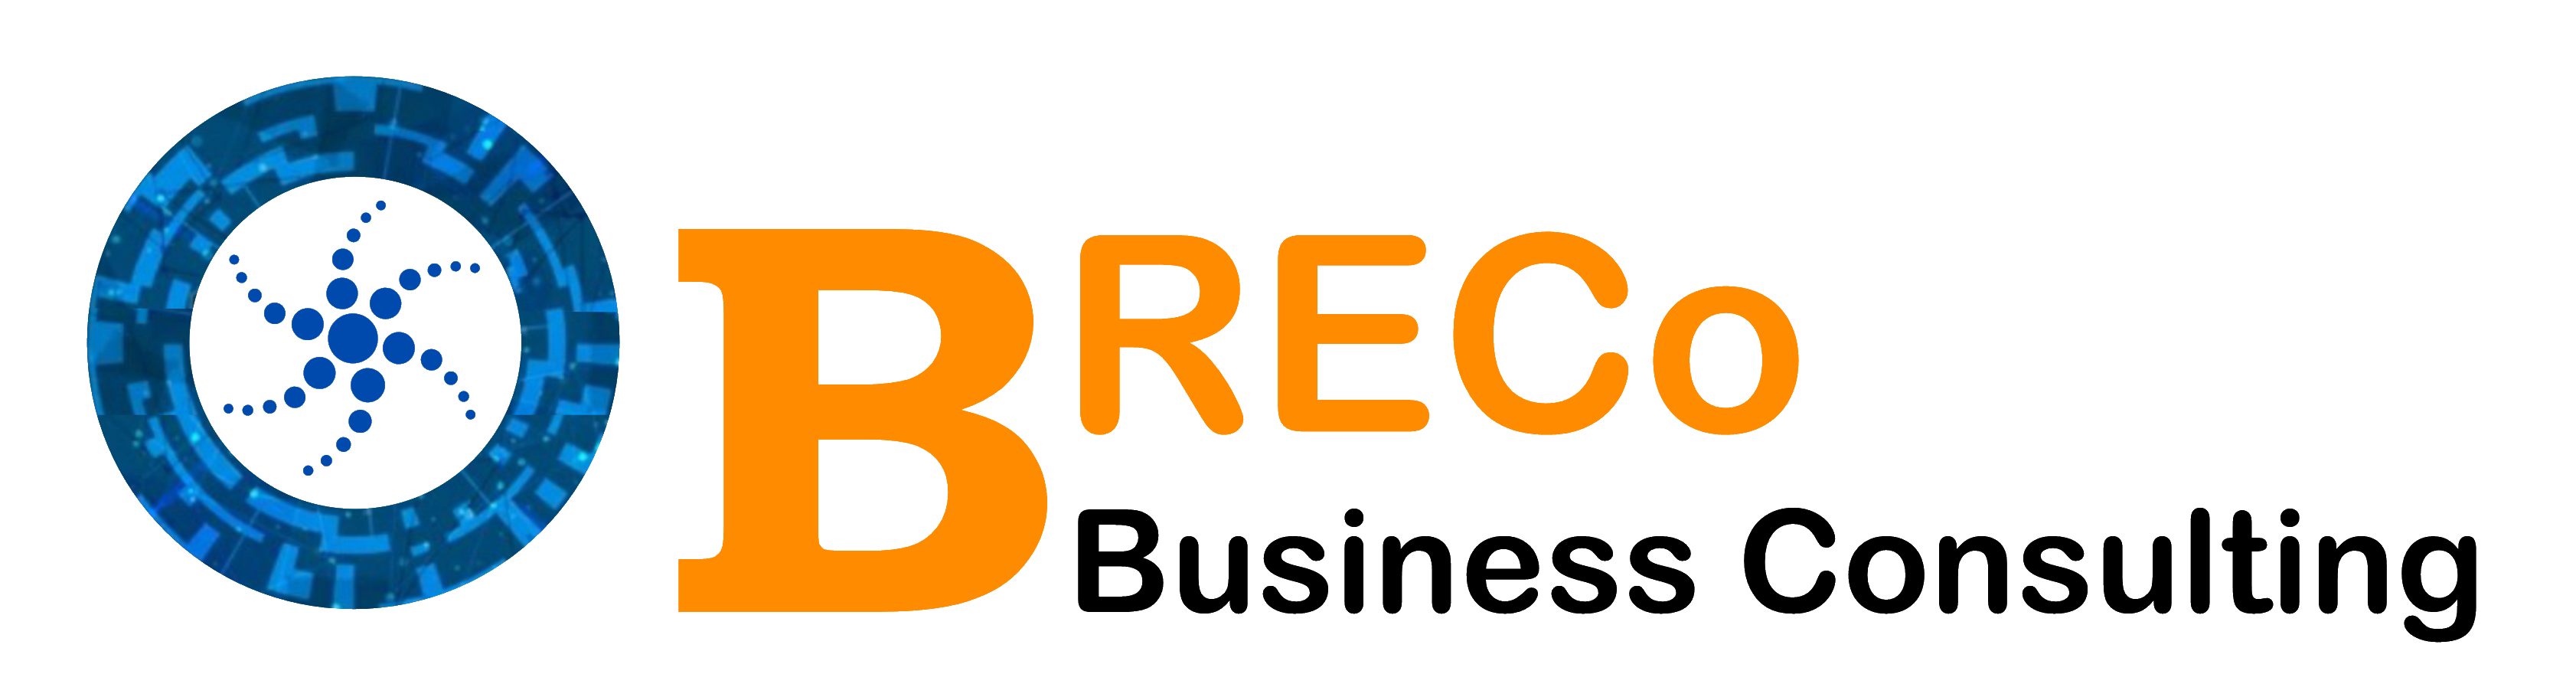 Breco Business Consulting